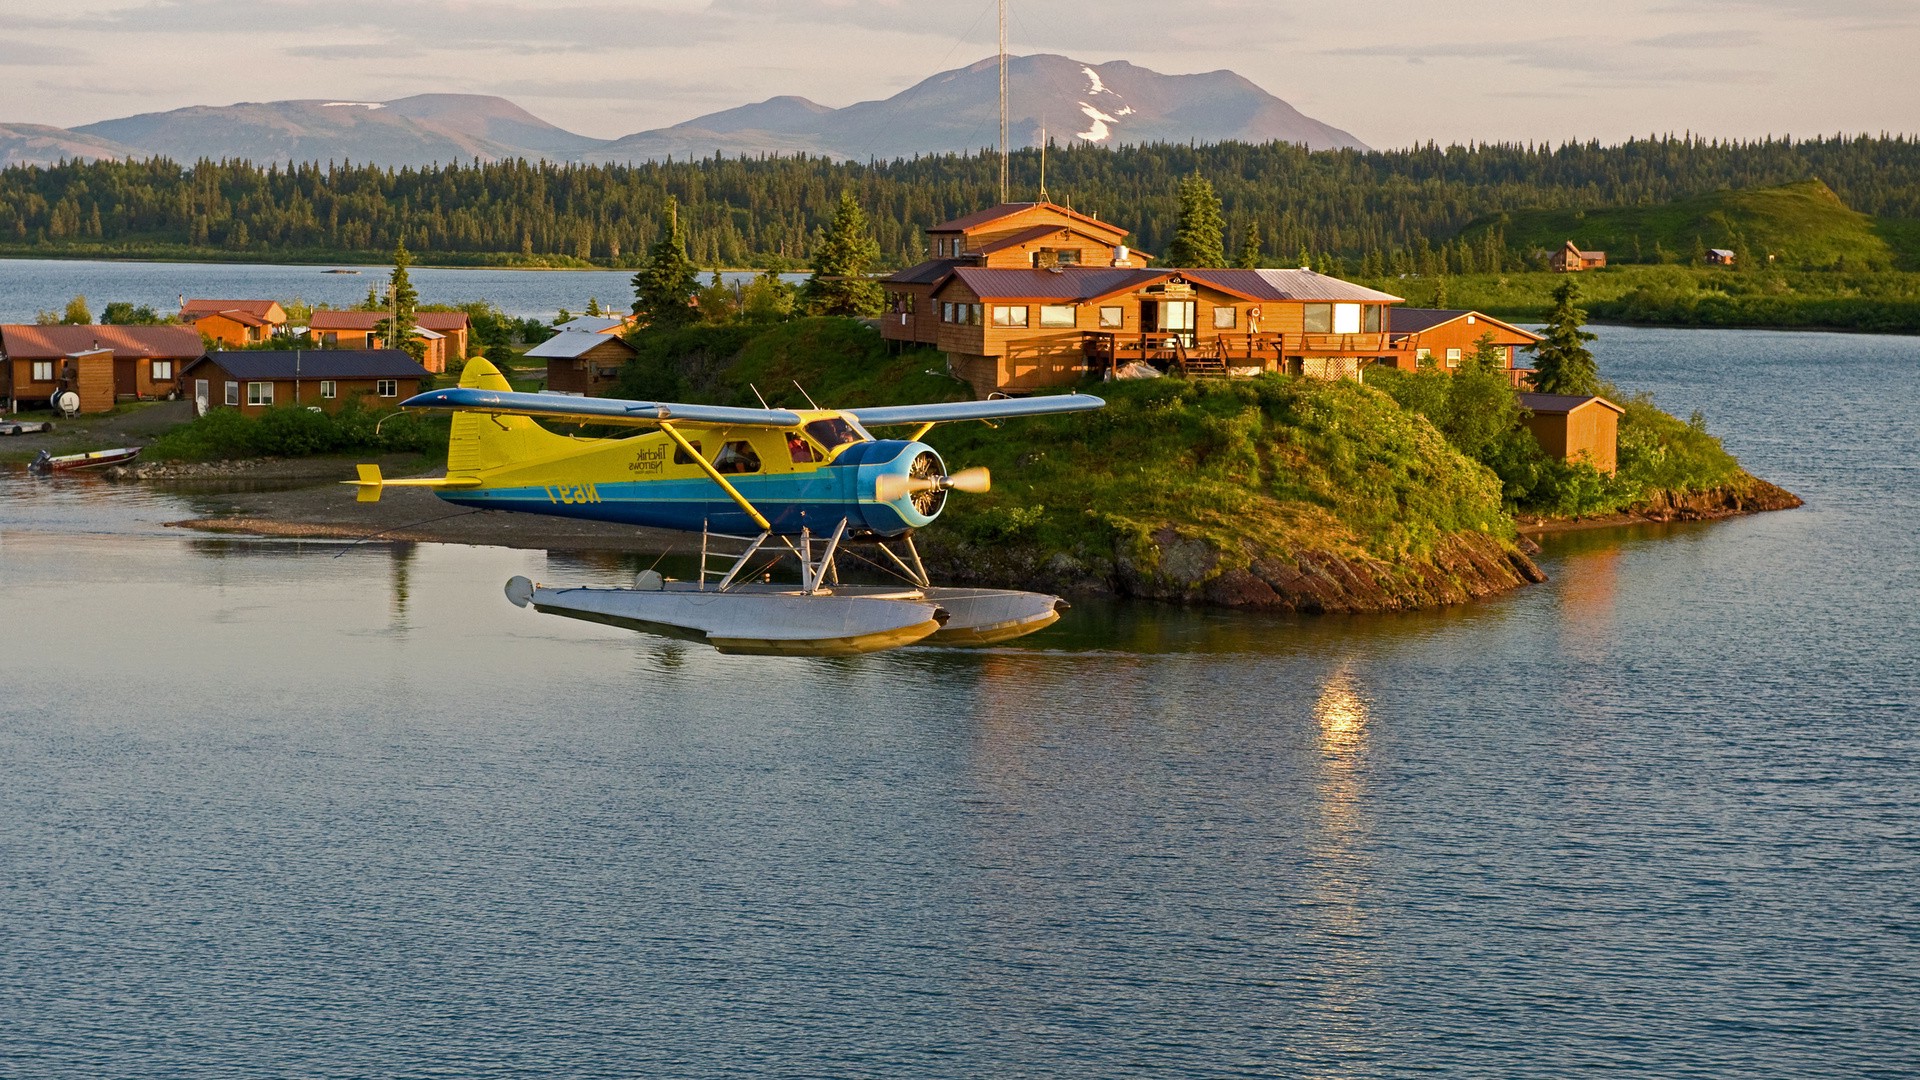 airplane, Aircraft, Landscape, USA, Alaska, Lake, Water, Island, House, Trees, Forest, Mountain, Snow, Rock, Propeller, Clouds, Star Engine Wallpaper